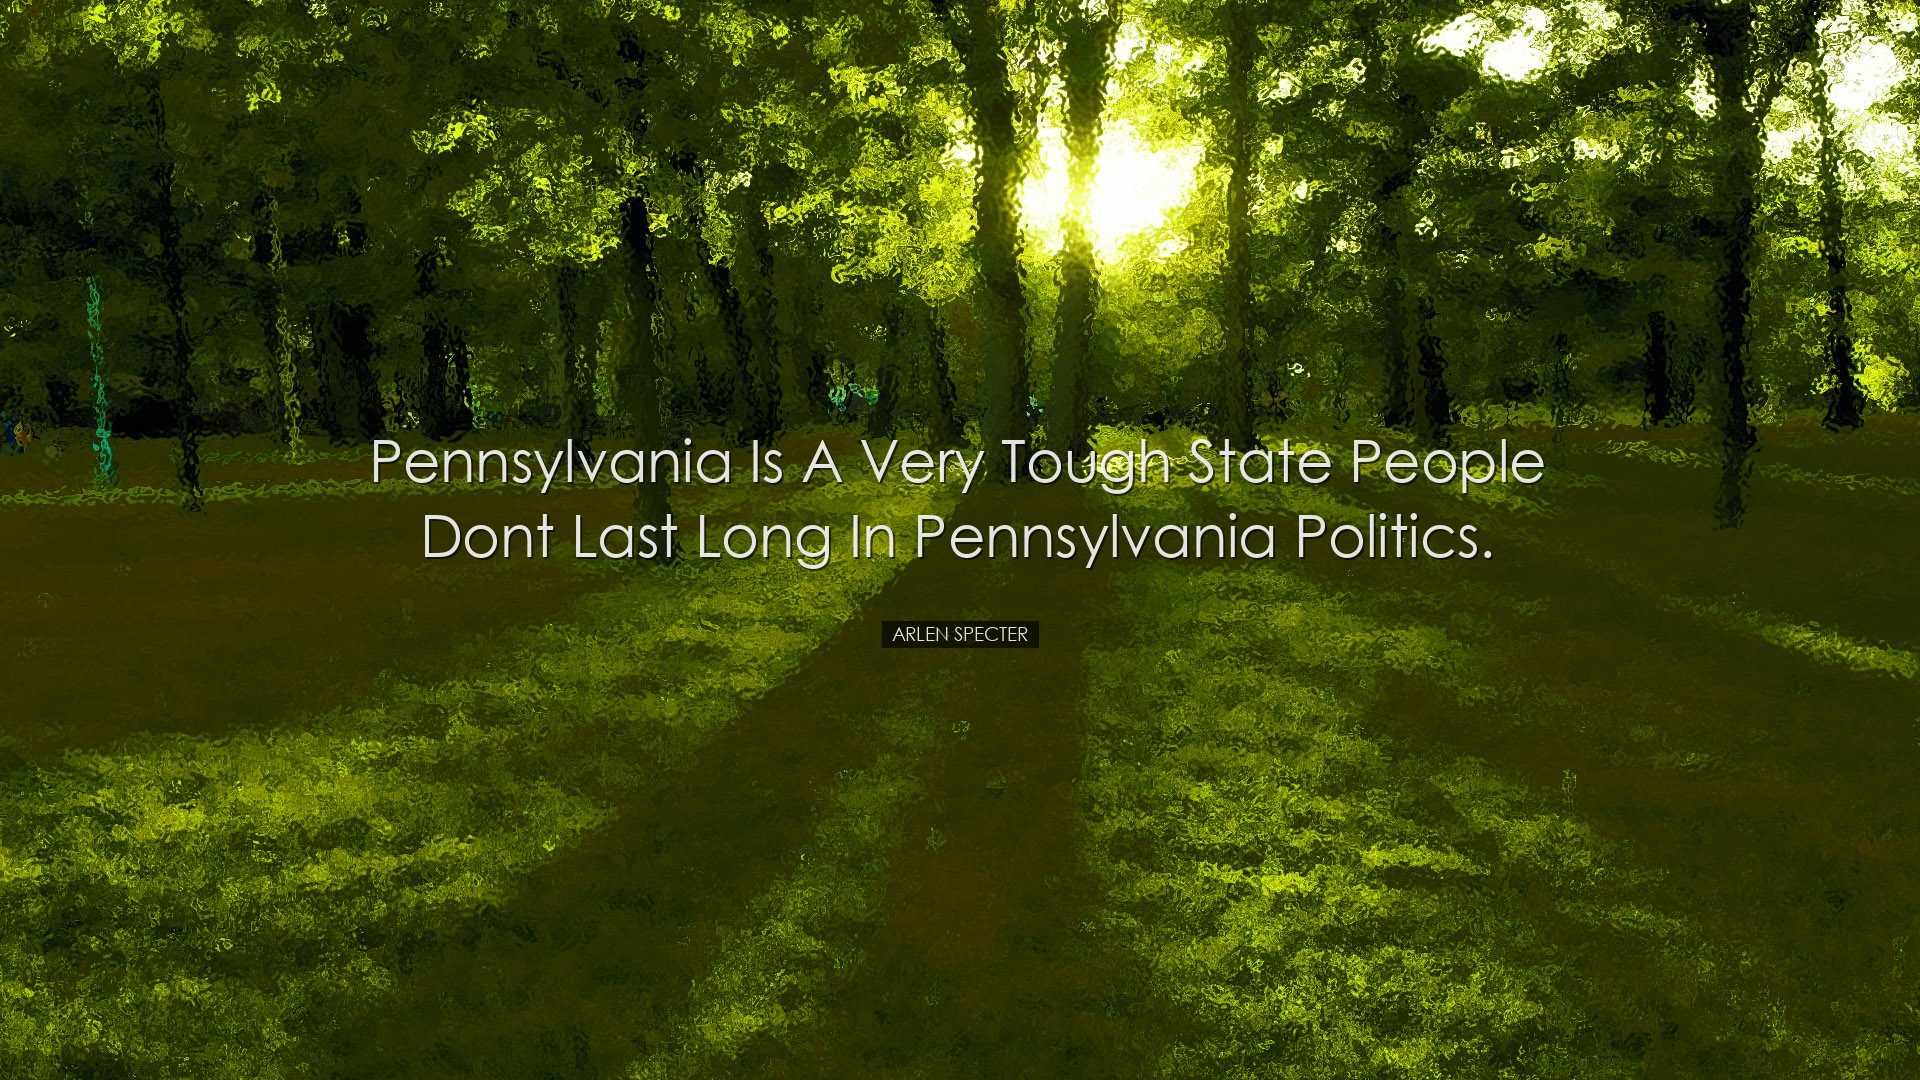 Pennsylvania is a very tough state people dont last long in Pennsy